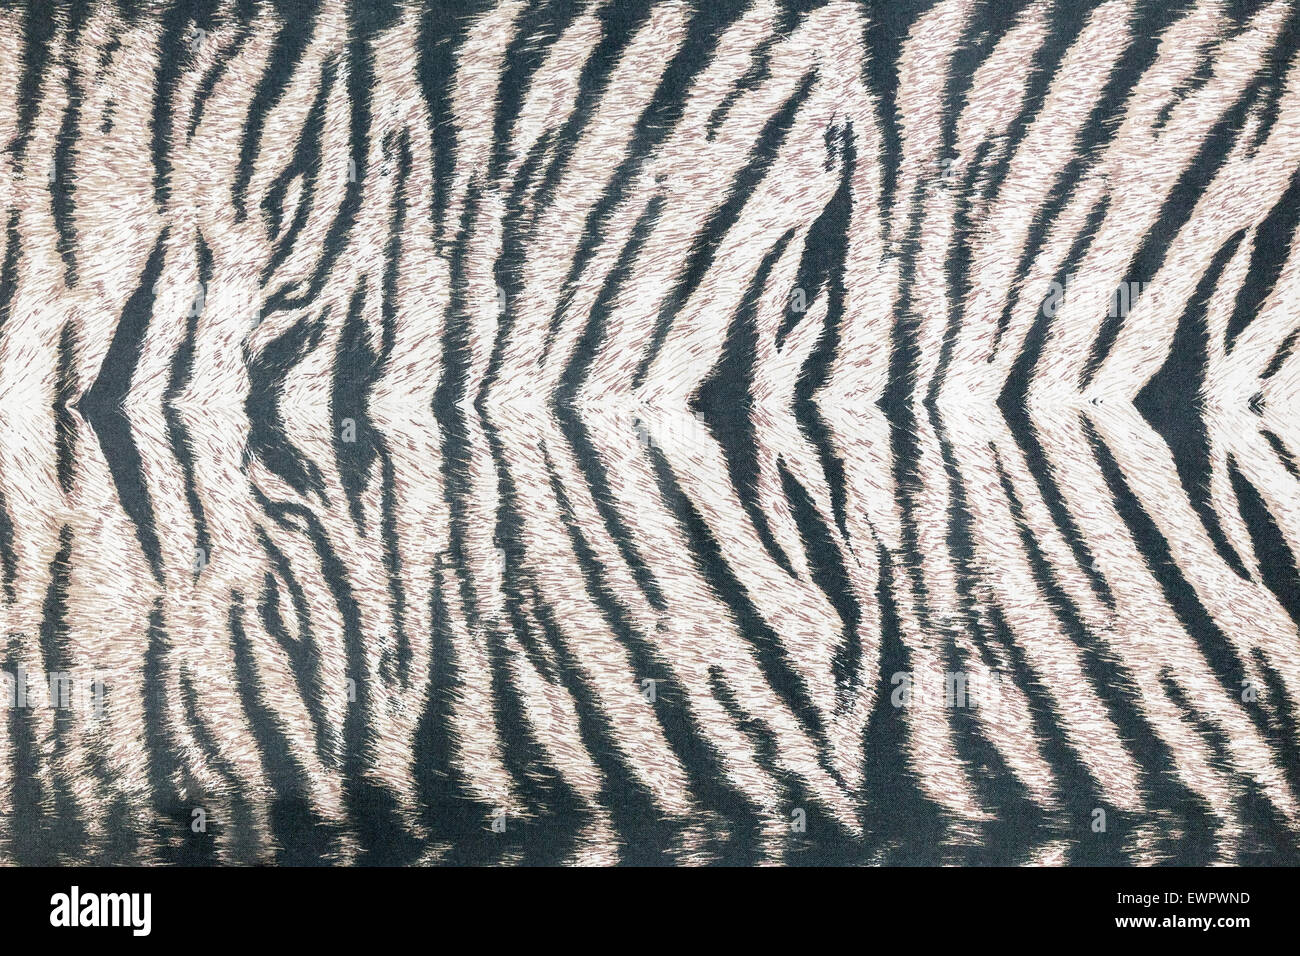 Background or backdrop of vertical striped animal fur print Stock Photo